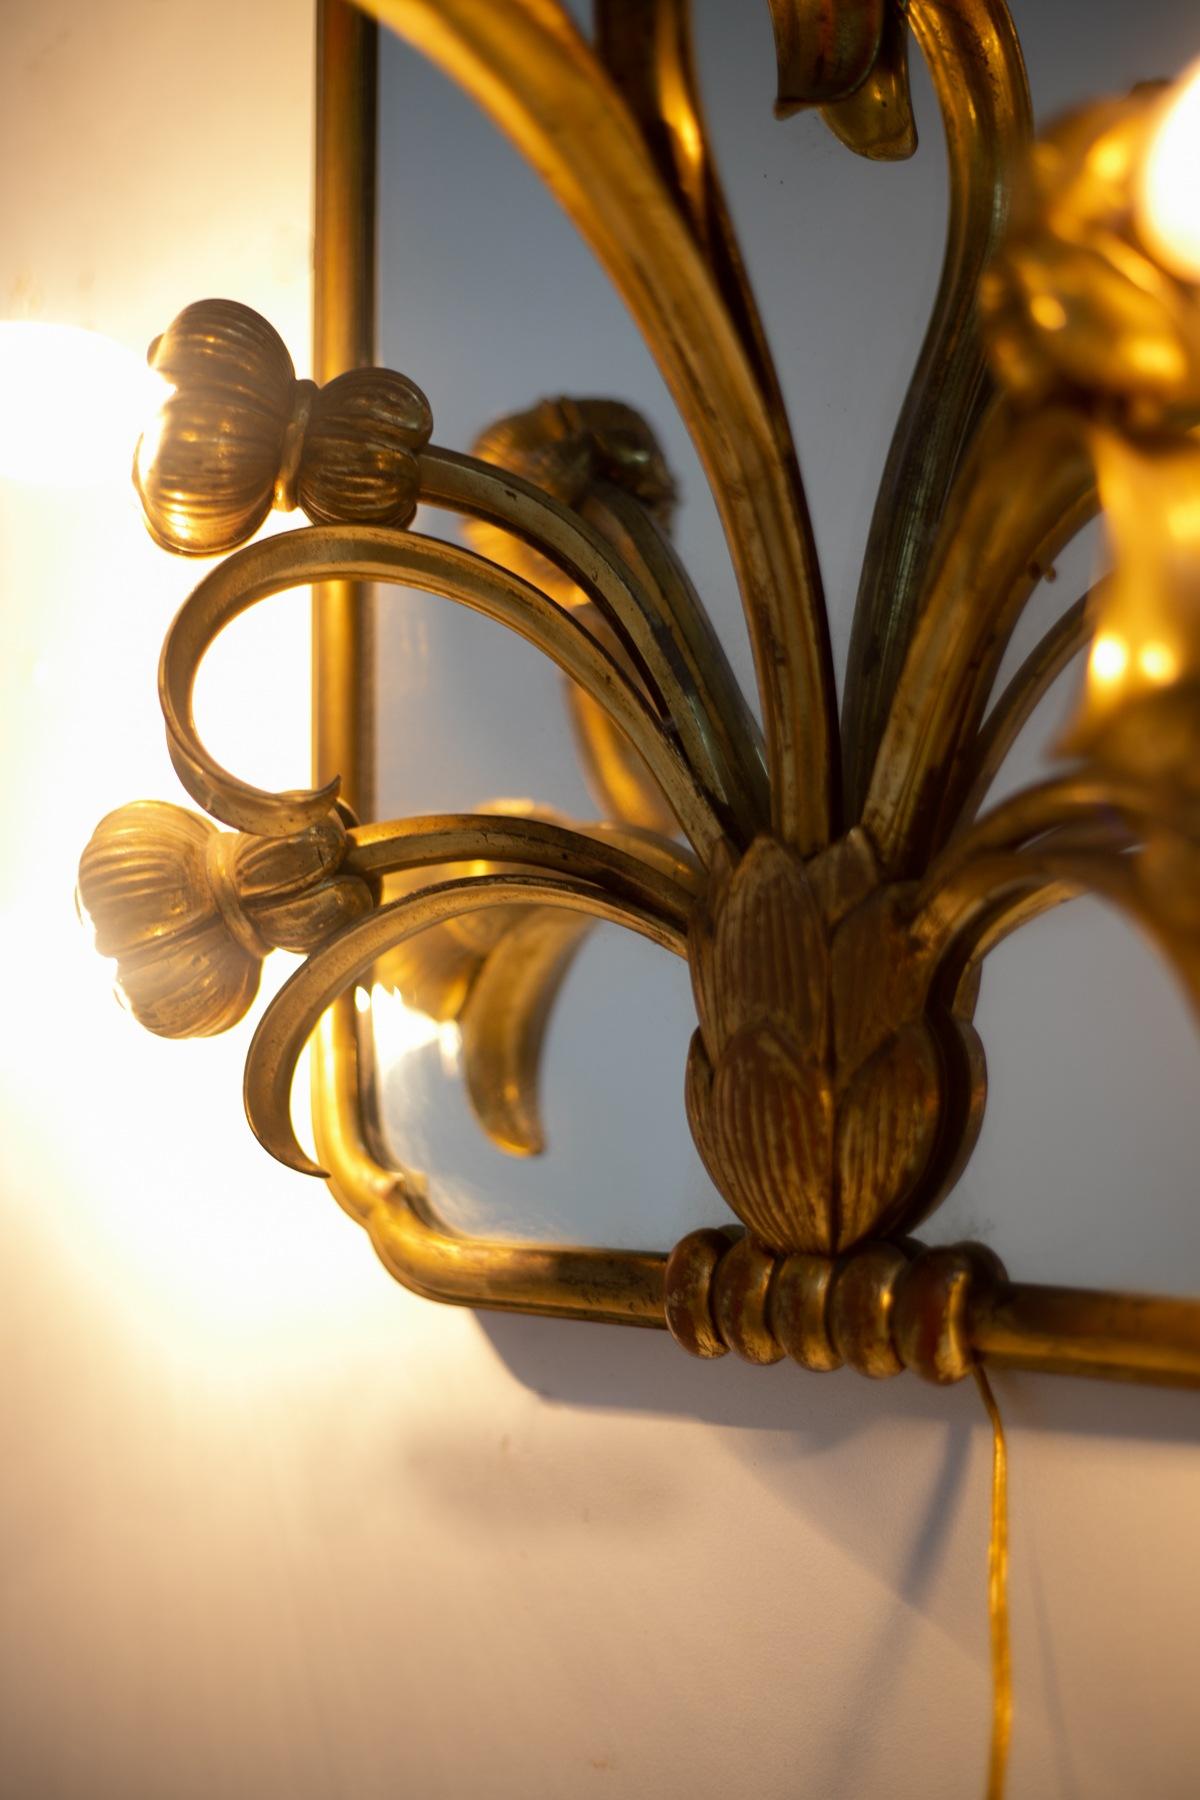 Wonderful mirror with applique from the Art Nouveau period, marvellous French manufacture, from a very chic Parisian restaurant.
The mirror has a rectangular shape with rounded corners, entirely made of brass in original patina. The top is